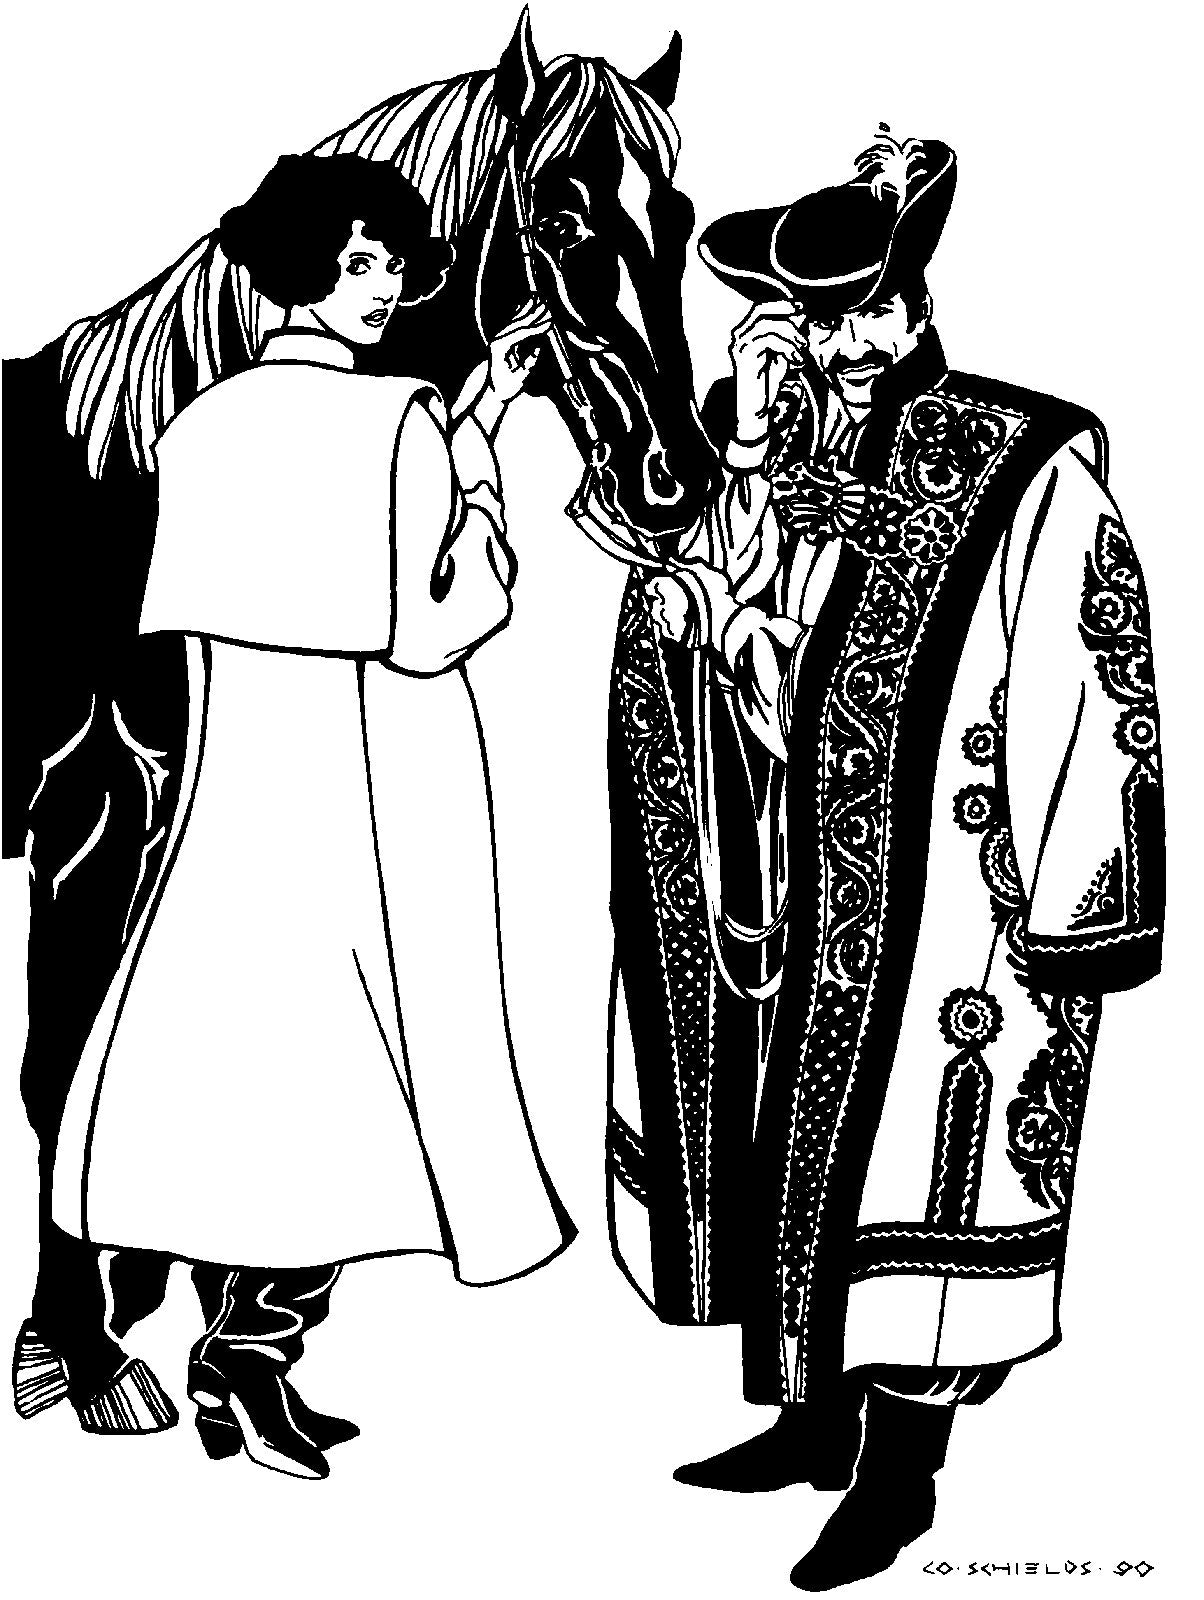 Black and white pen and ink drawing by artist Gretchen Schields. Man and woman wearing Hungarian Szur.  Woman is wearing simple contemporary version with her back turned showing collar flap.  Man is wearing ornate traditional version with front buckle closure and cutwork applique.